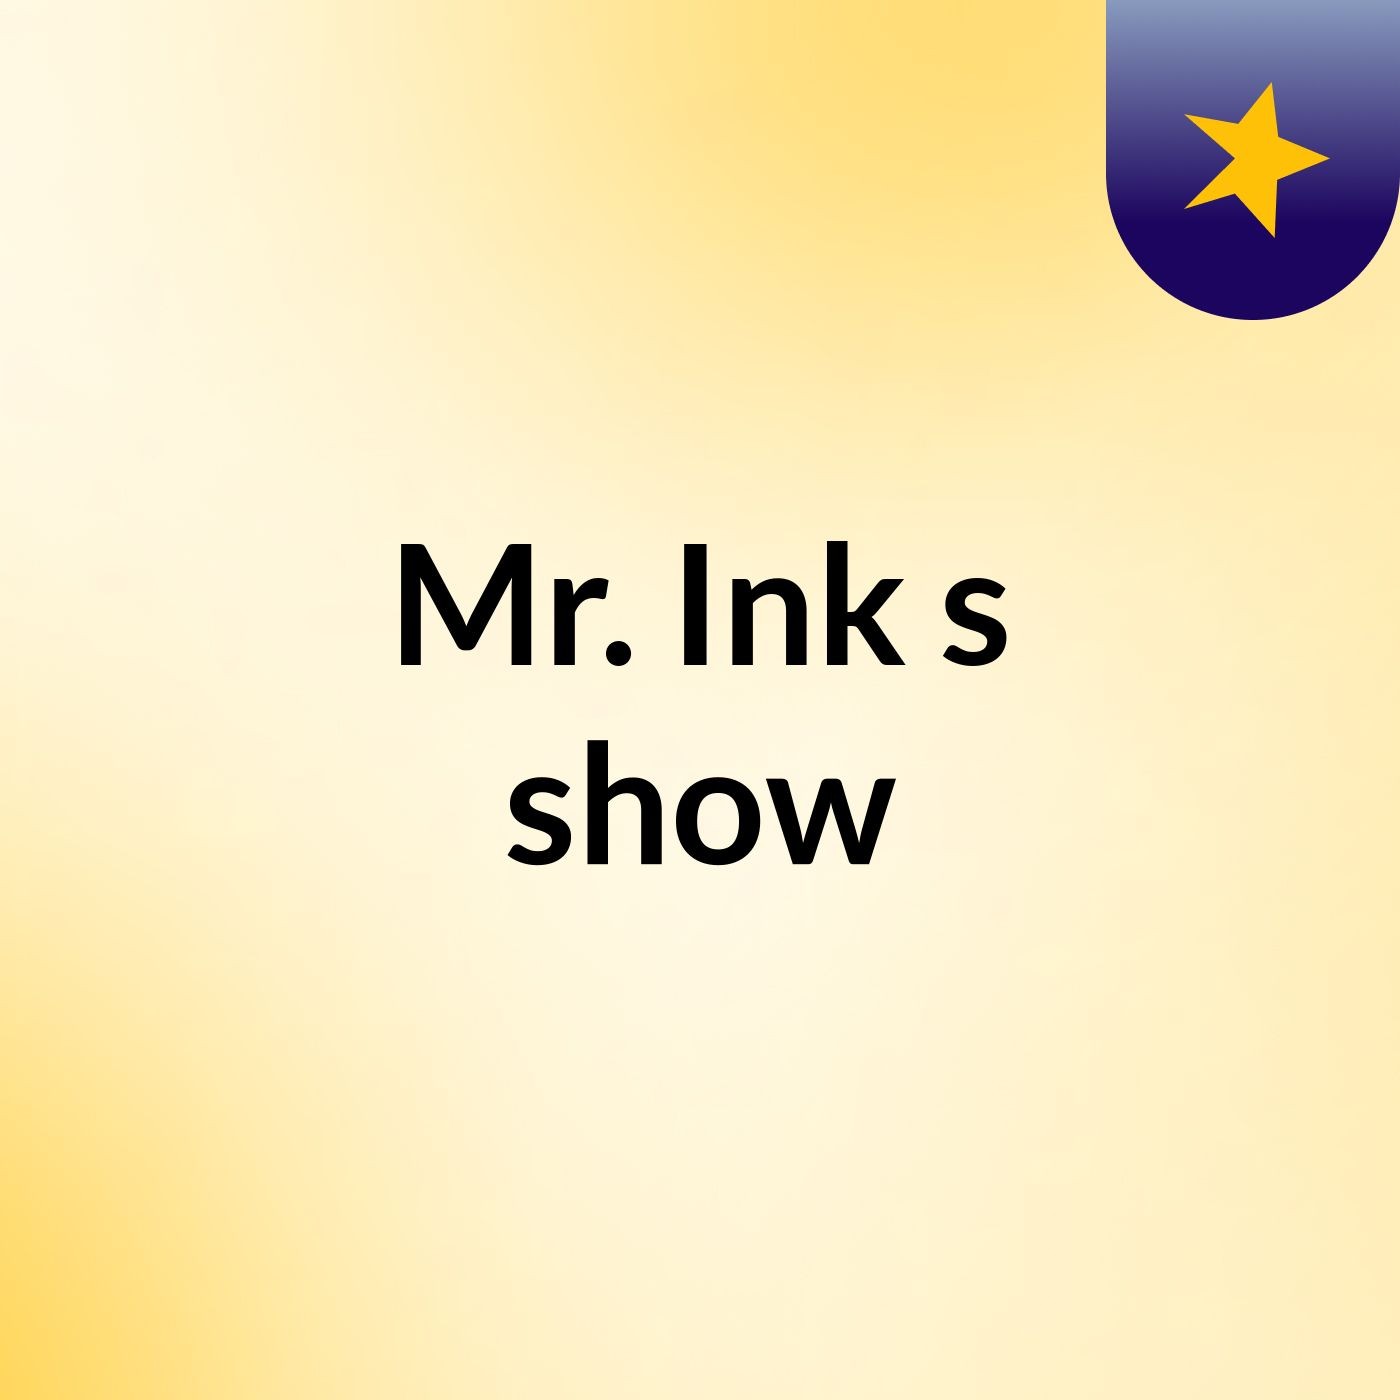 Mr. Ink's show